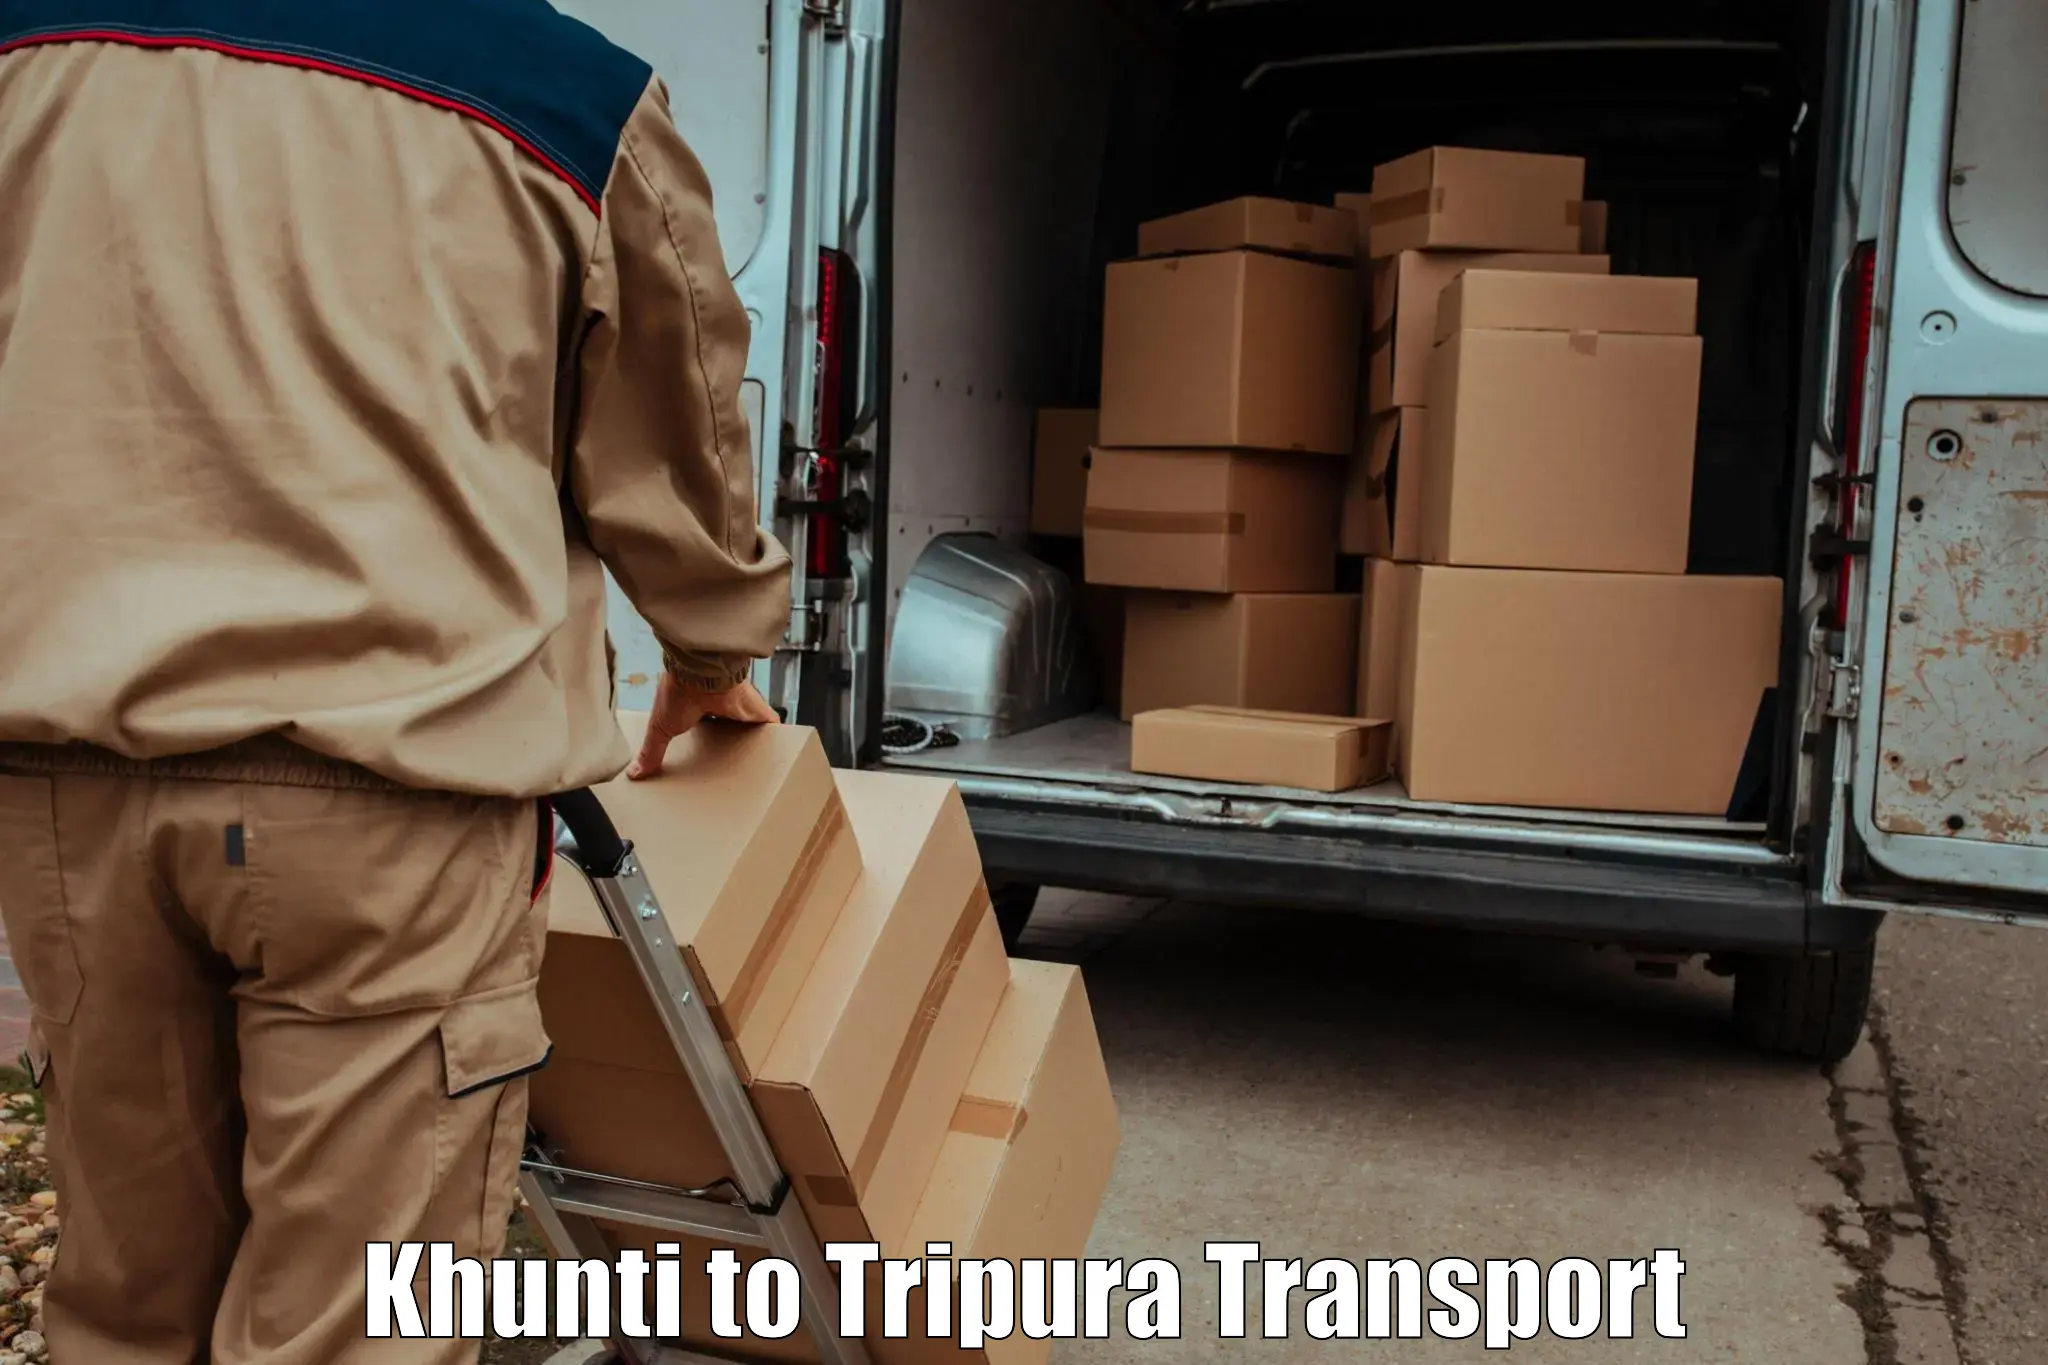 Express transport services Khunti to Udaipur Tripura